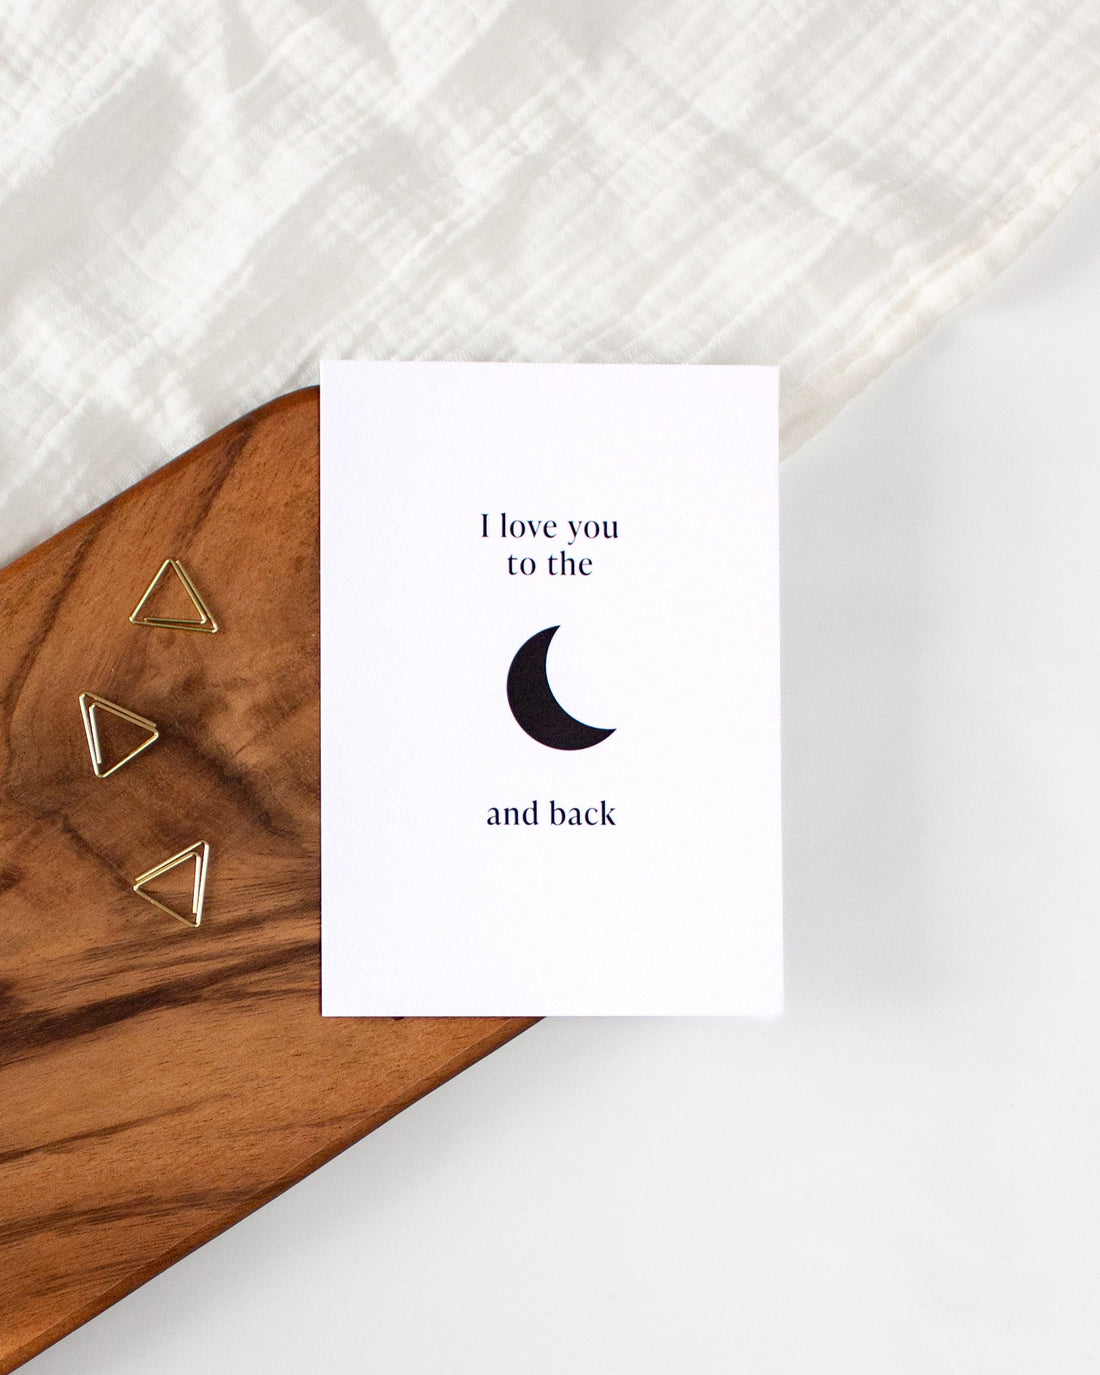 A white postcard laying on a wooden board with some golden triangle paperclips and a white cloth in the background. The postcard design shows a simple black moon symbol in the middle with text above it saying &quot;I love you to the&quot; and text below it saying &quot;and back&quot;.